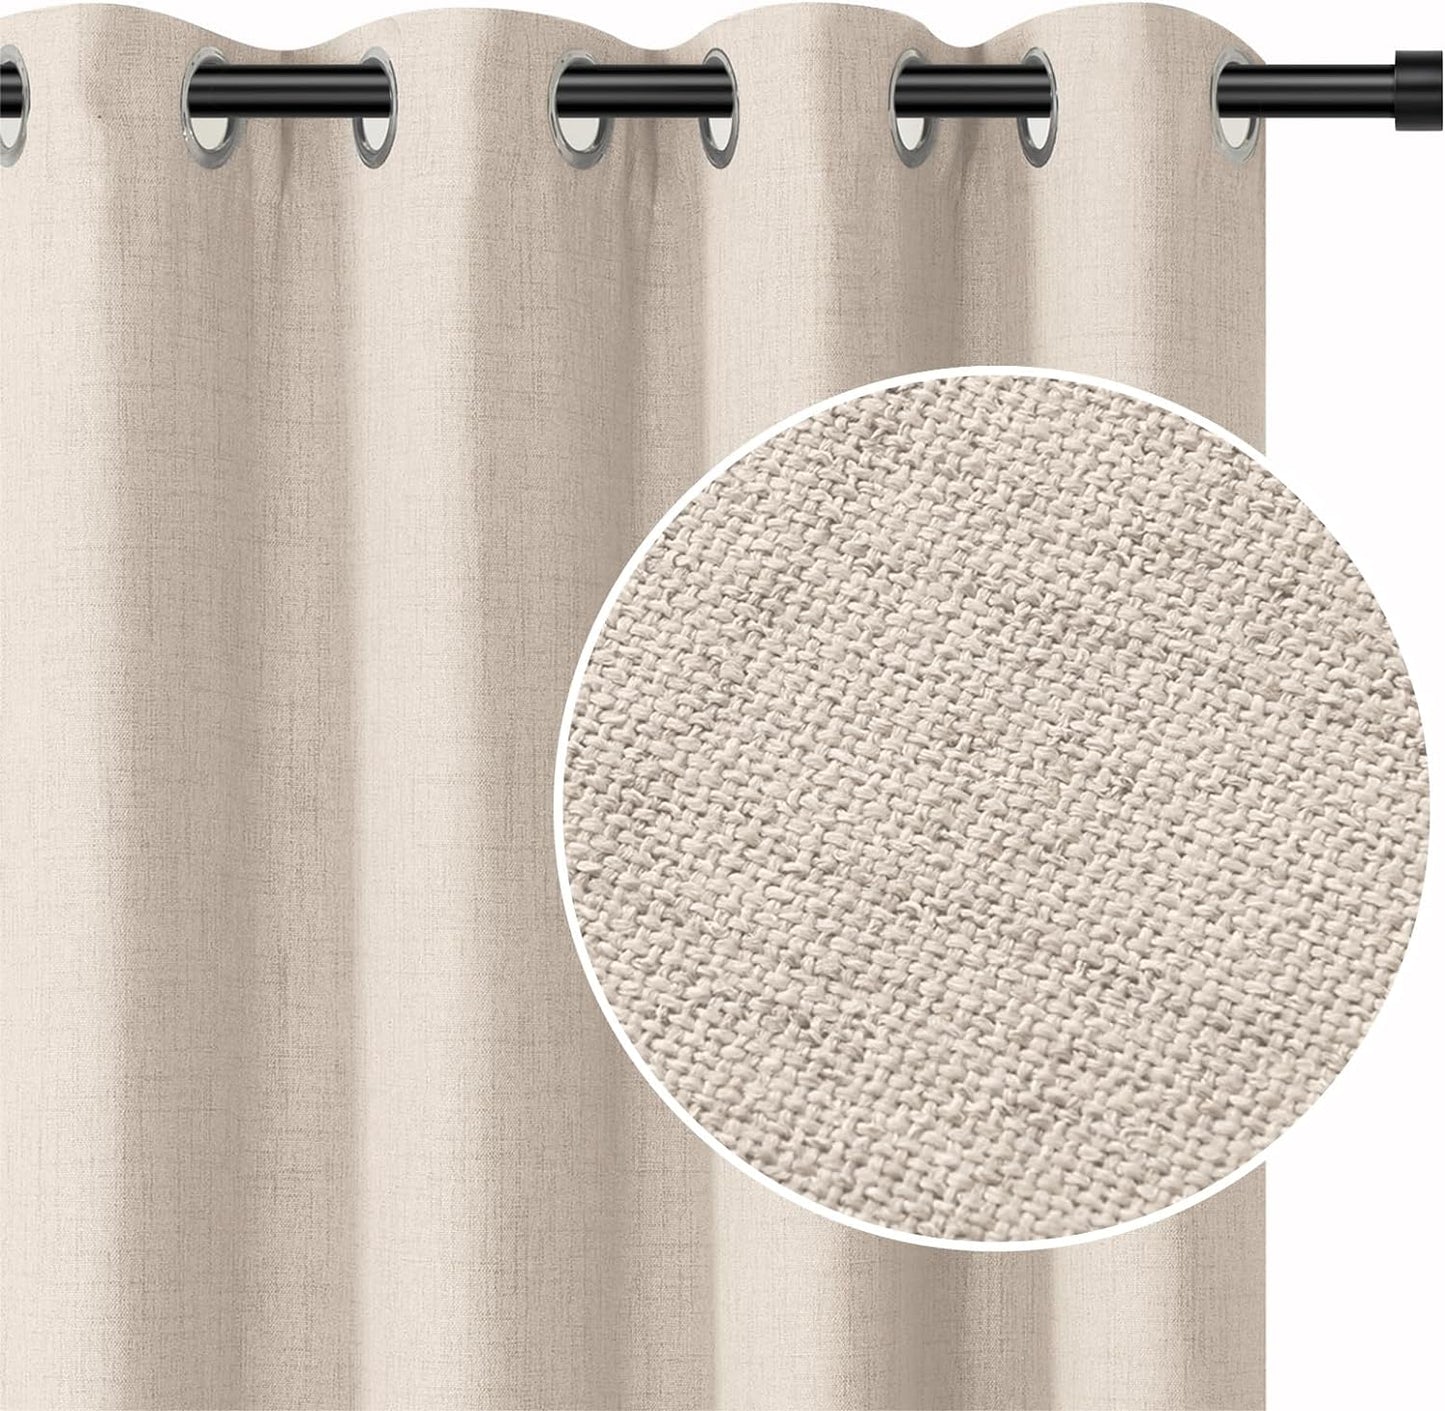 INOVADAY Blackout Curtains 63 Inch Length 2 Panels Set, Thermal Insulated Linen Blackout Curtains & Drapes Grommet Room Darkening Curtains for Bedroom Living Room- Dark Grey, W50 X L63  INOVADAY Oatmeal 50"W X 96"L 